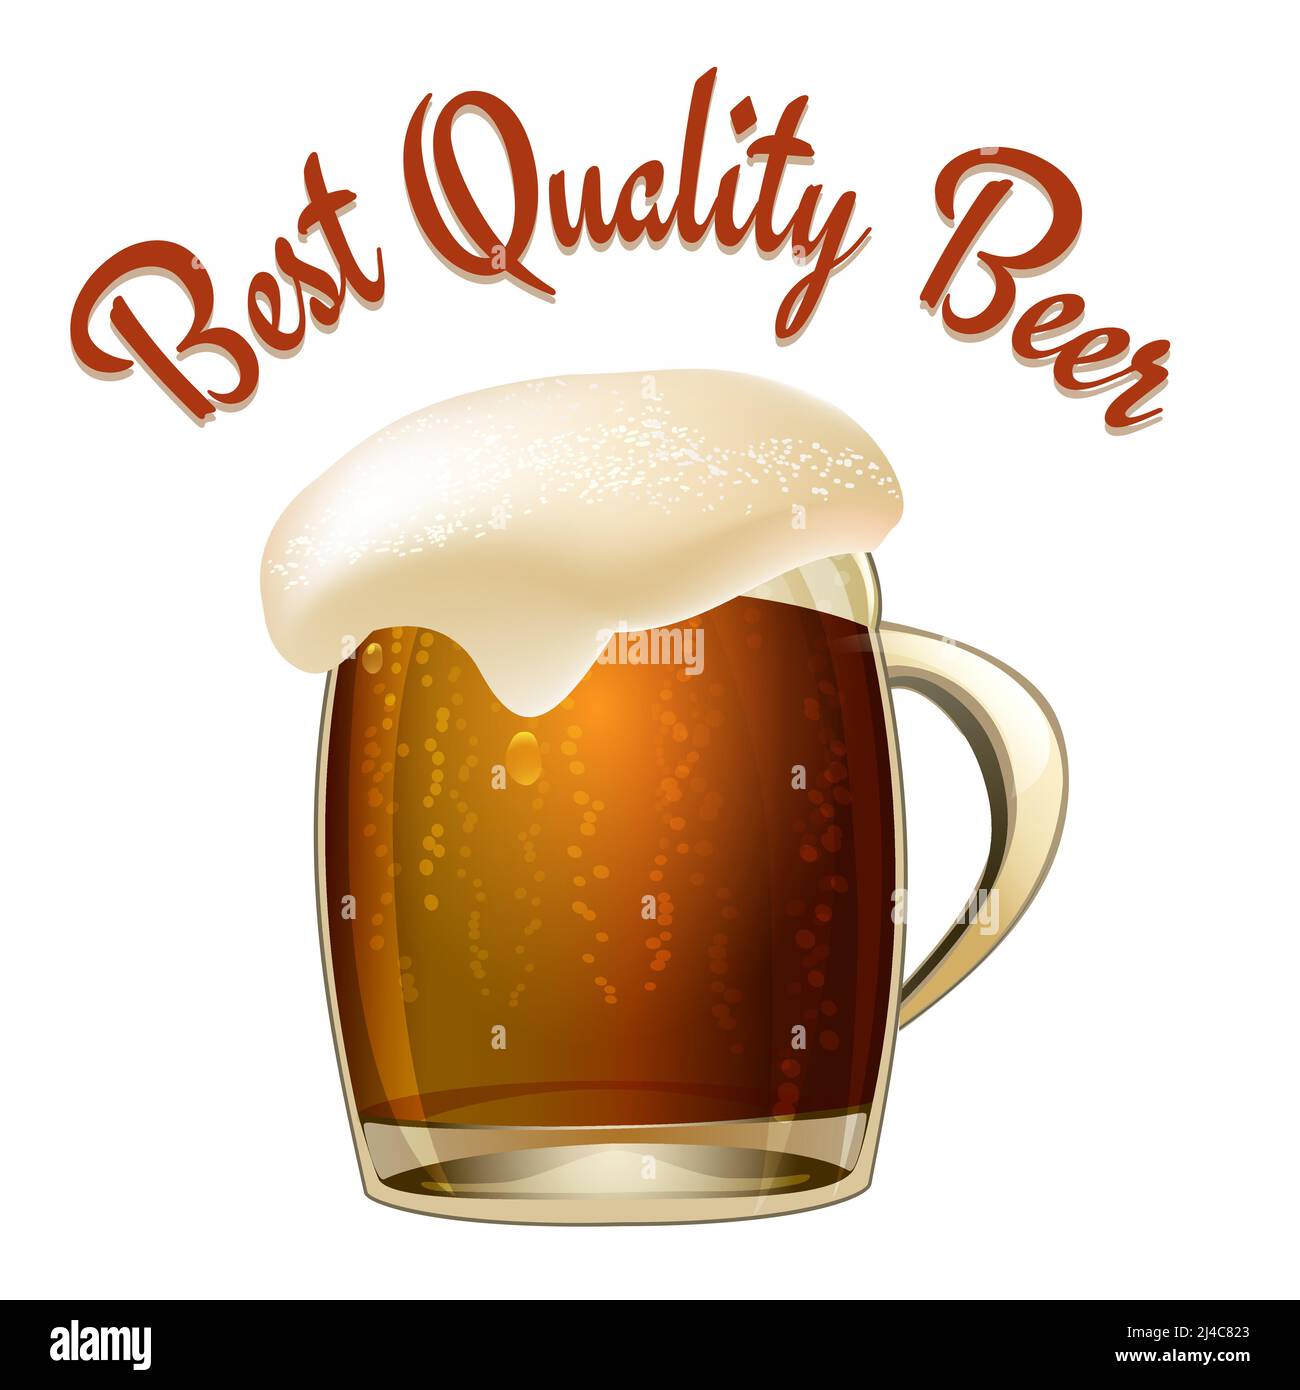 Best Quality Beer poster illustration with a glass tankard of dark beer or lager with a wonderful frothy head overflowing the glass and arched text ab Stock Vector